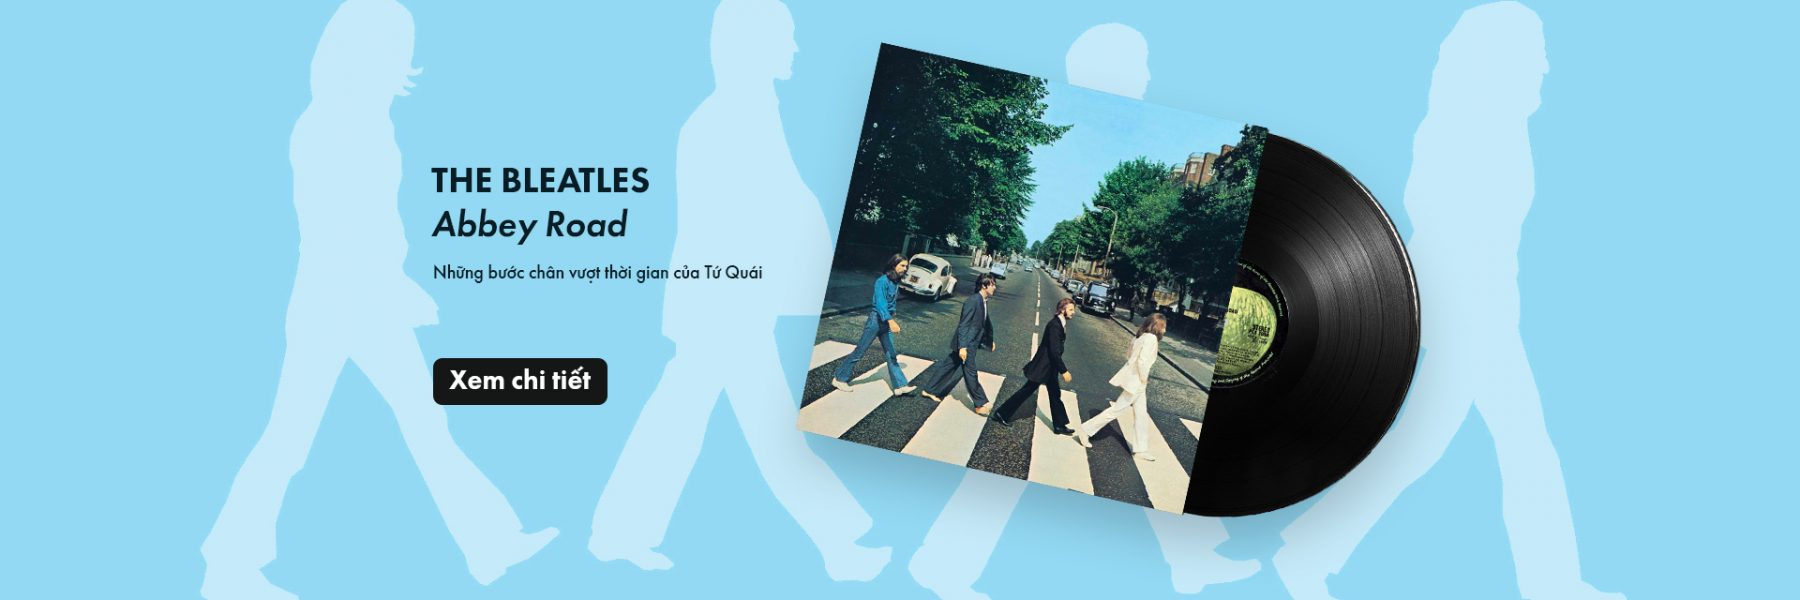 https://vocrecords.vn/product/dia-moi/record-cua-thang-dia-moi/the-beatles-abbey-road-50th-anniversary-1lp/